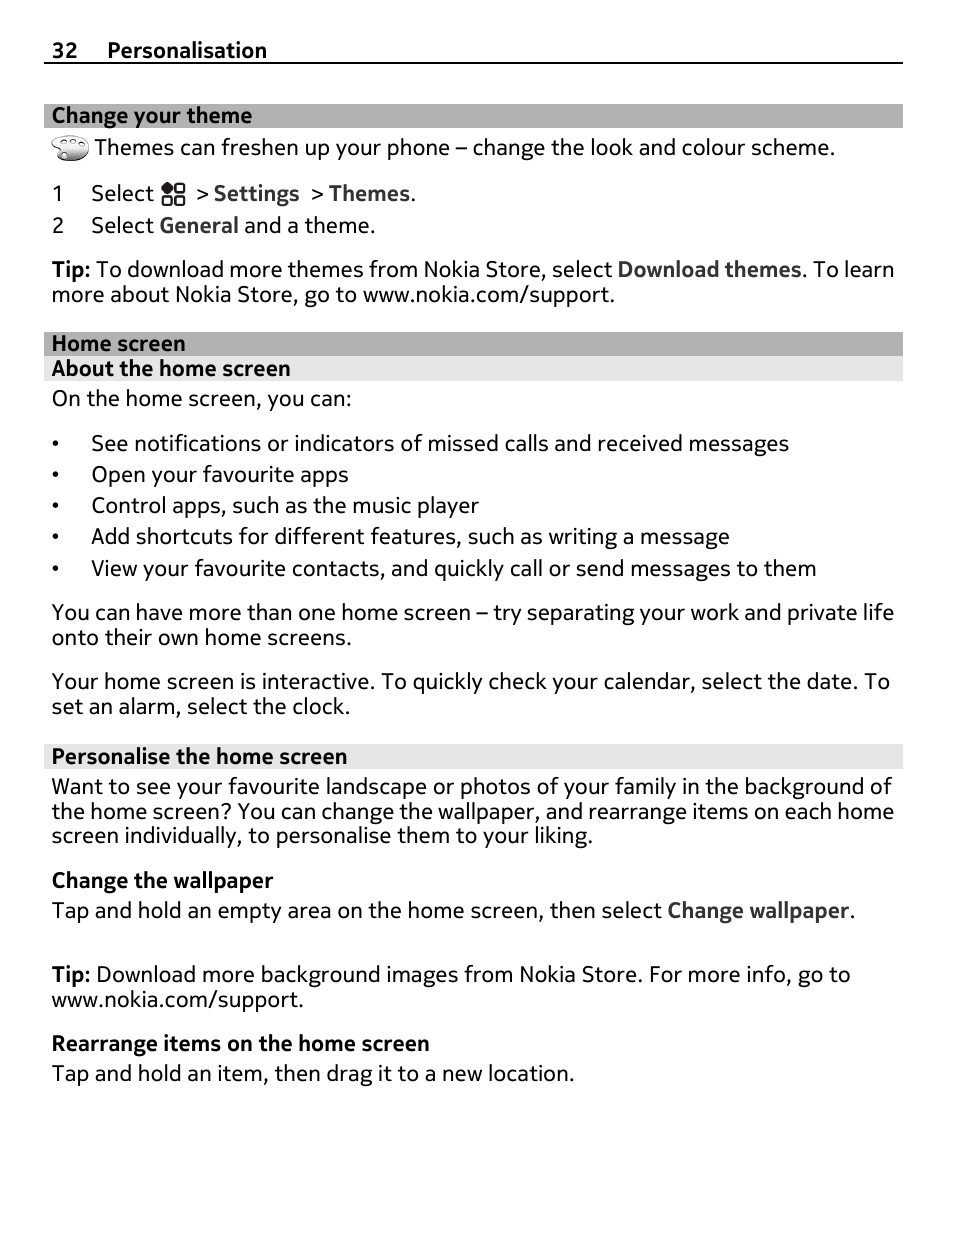 Change your theme, Home screen, About the home screen | Personalise the home screen | Nikon Nokia C6-01 User Manual | Page 32 / 130